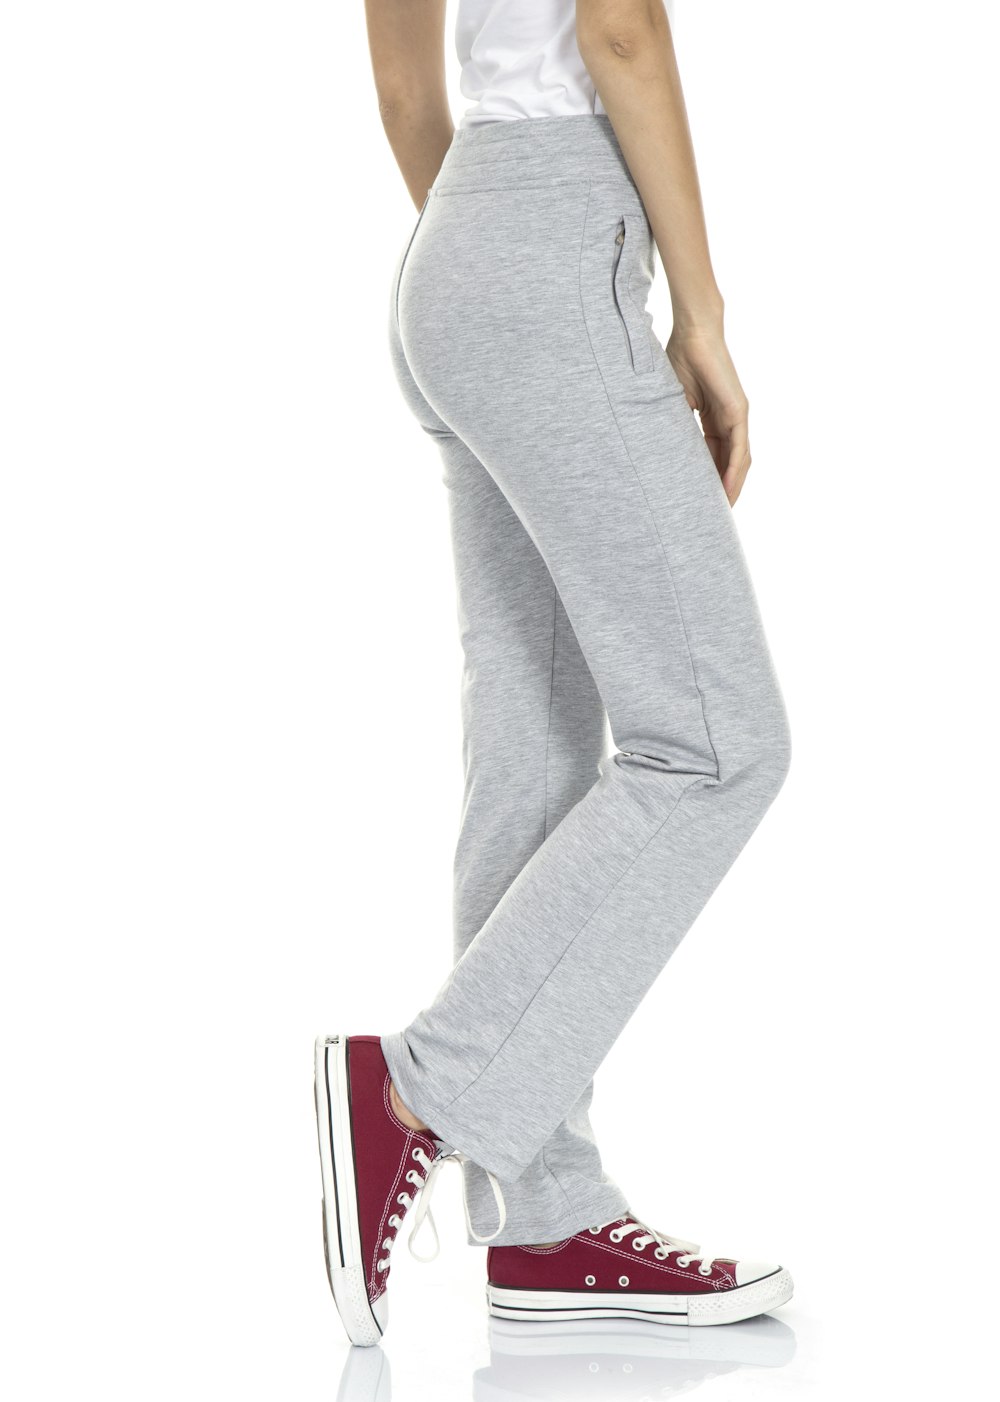 woman in gray tank top and gray pants